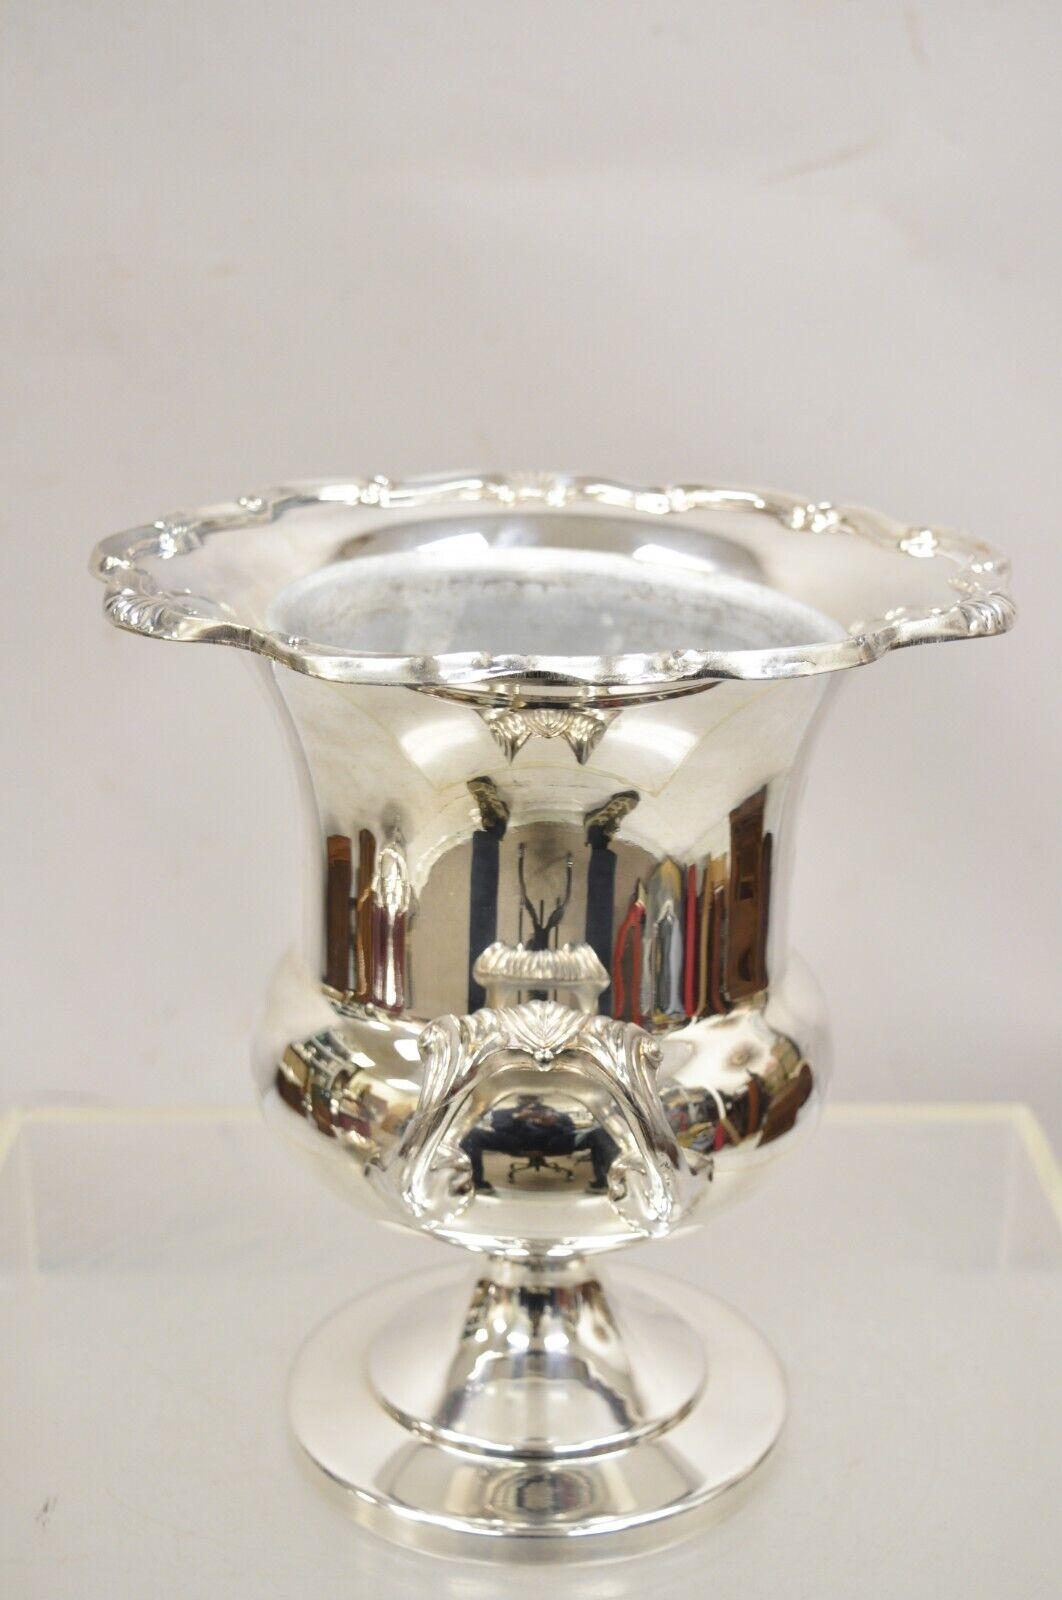 Vintage Towle Silver Plated Champagne Chiller Ice Bucket Trophy Cup engraved 